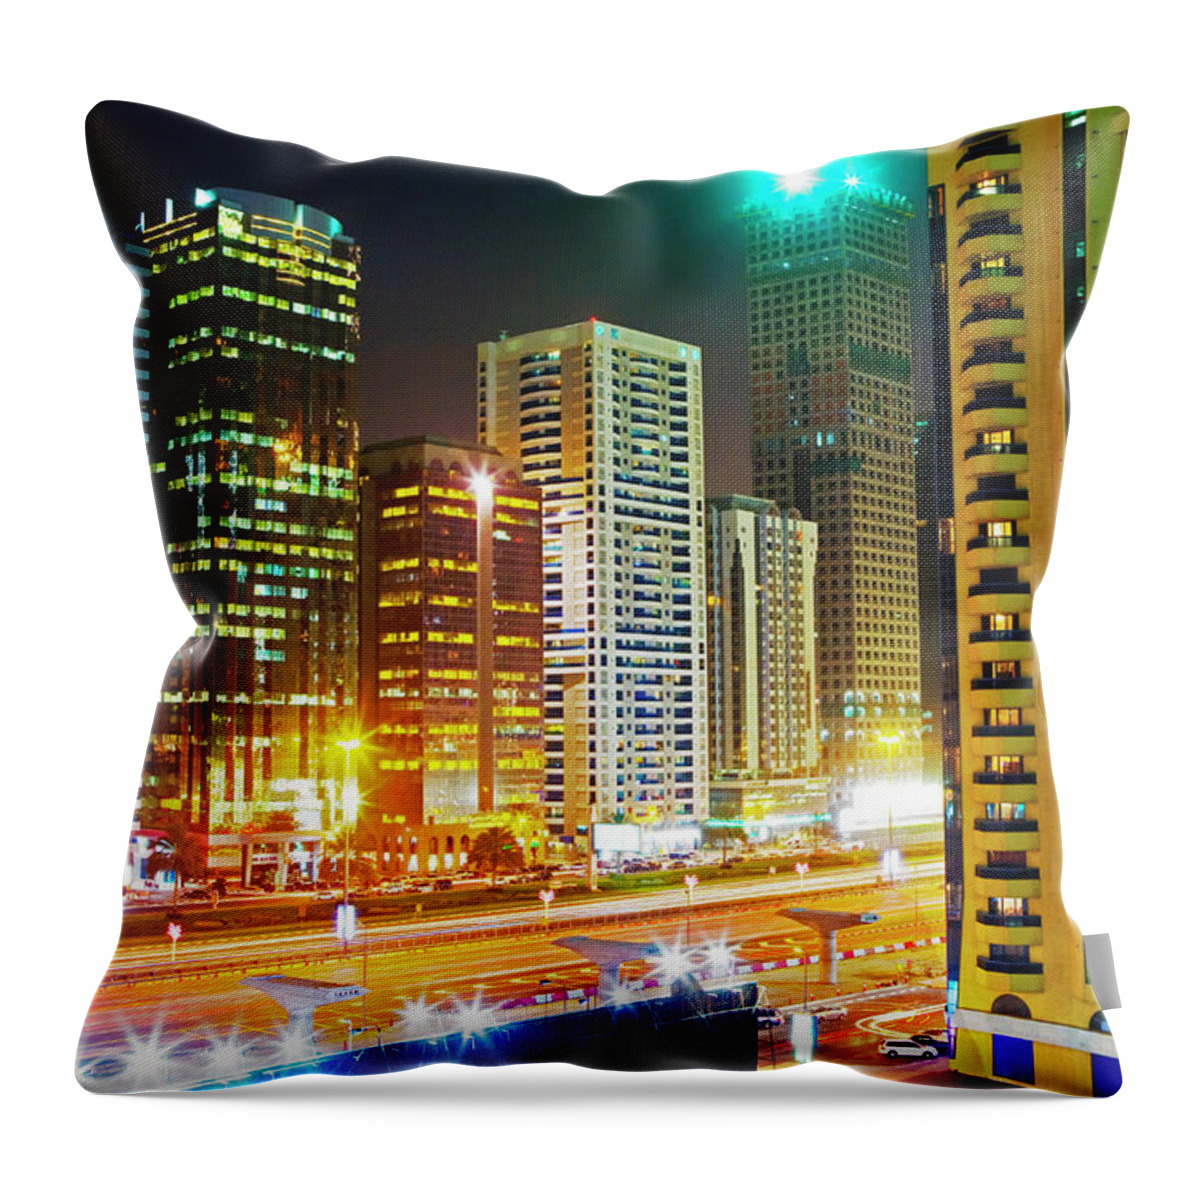 Tranquility Throw Pillow featuring the photograph Skyscrapers On Sheikh Zayed Road, Night by Scott E Barbour